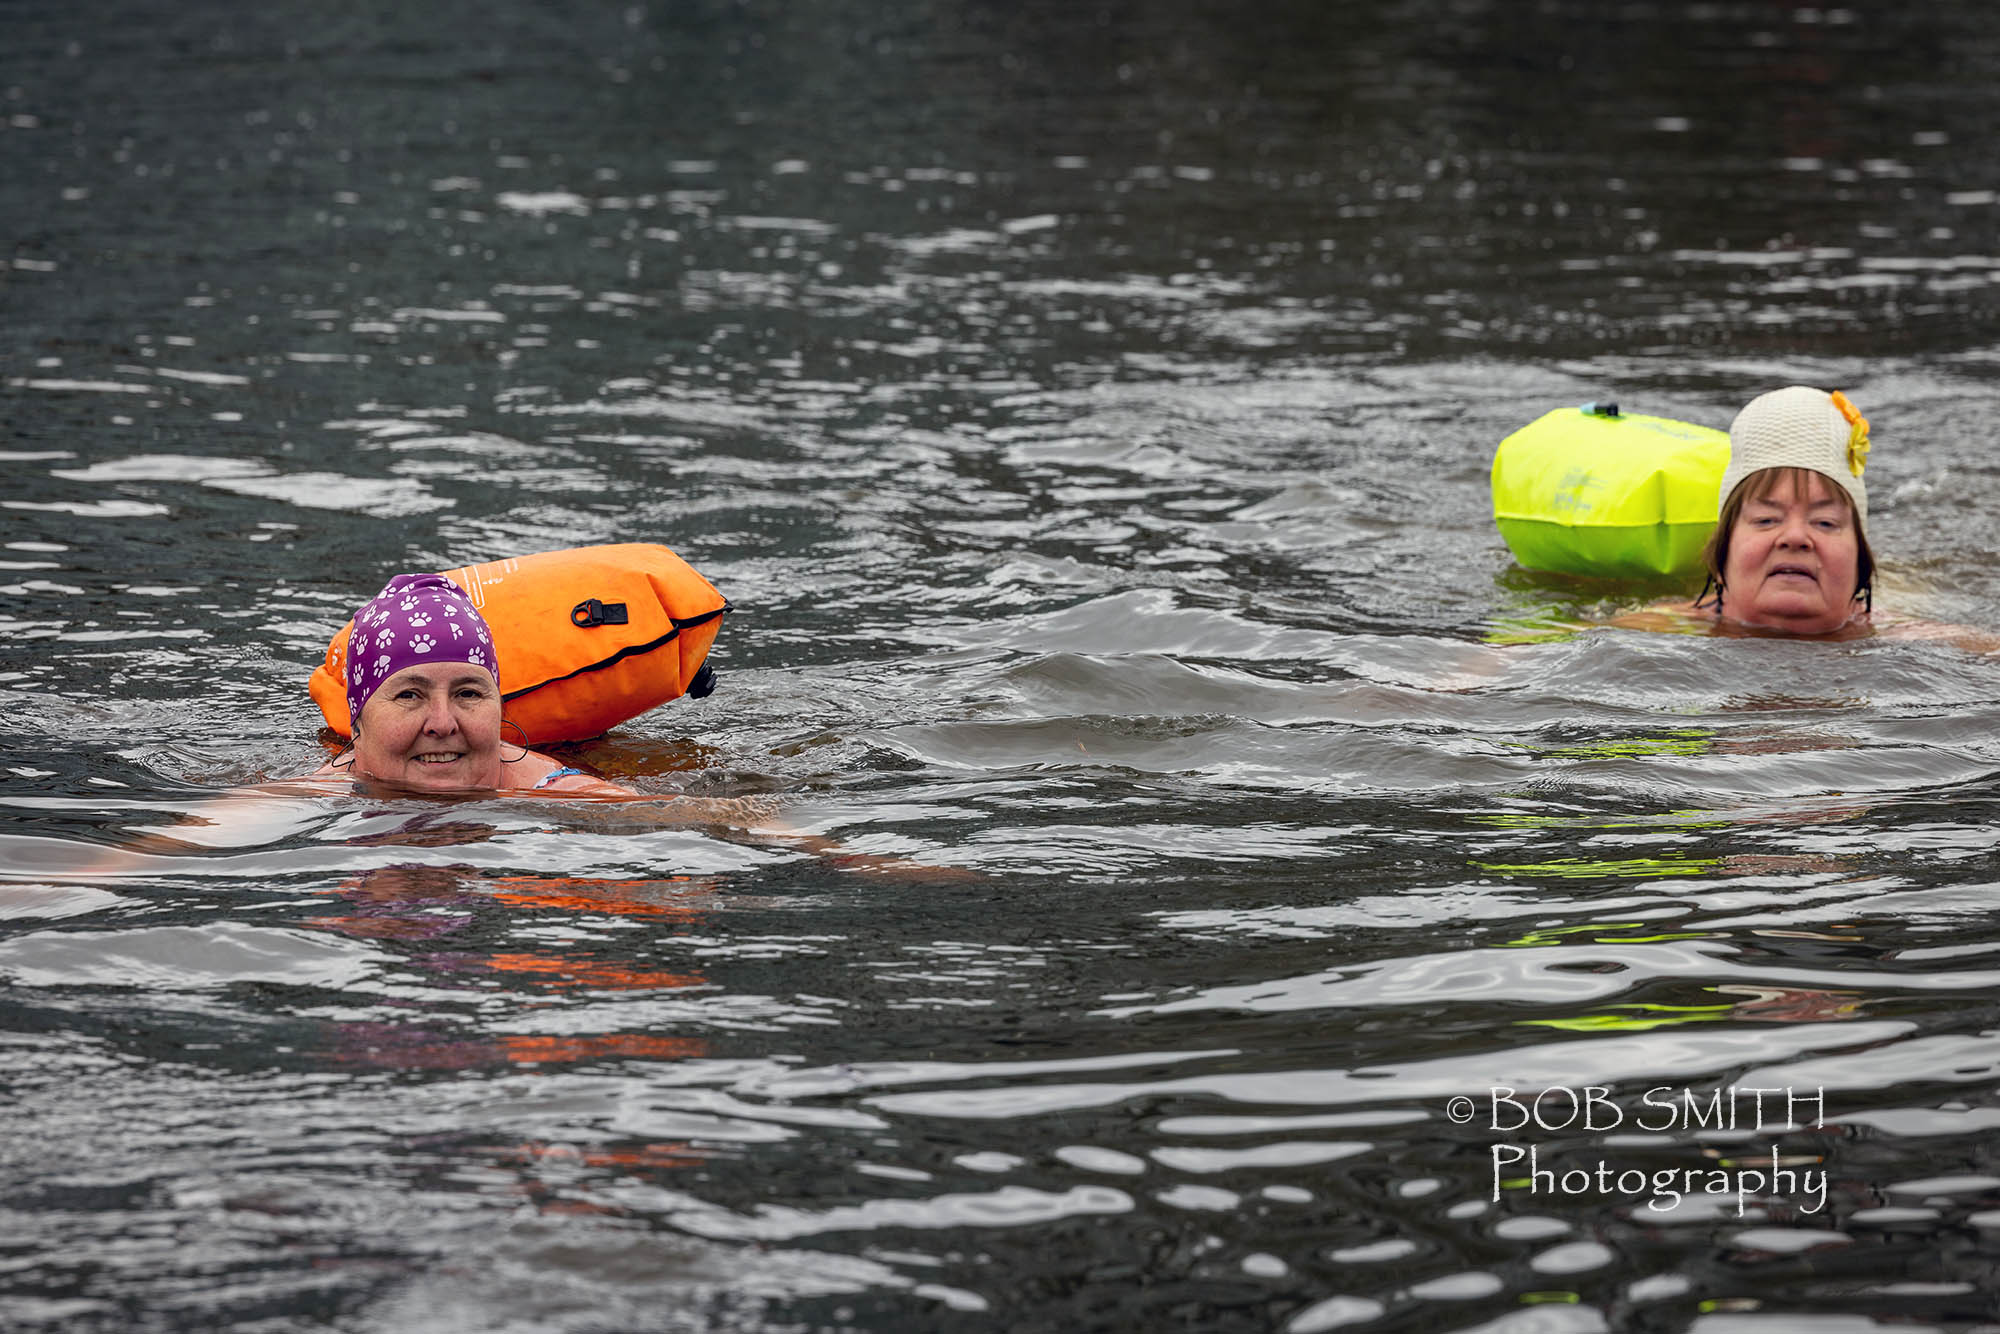 Outdoor swimmers brave the waters at the National Outdoor Expo